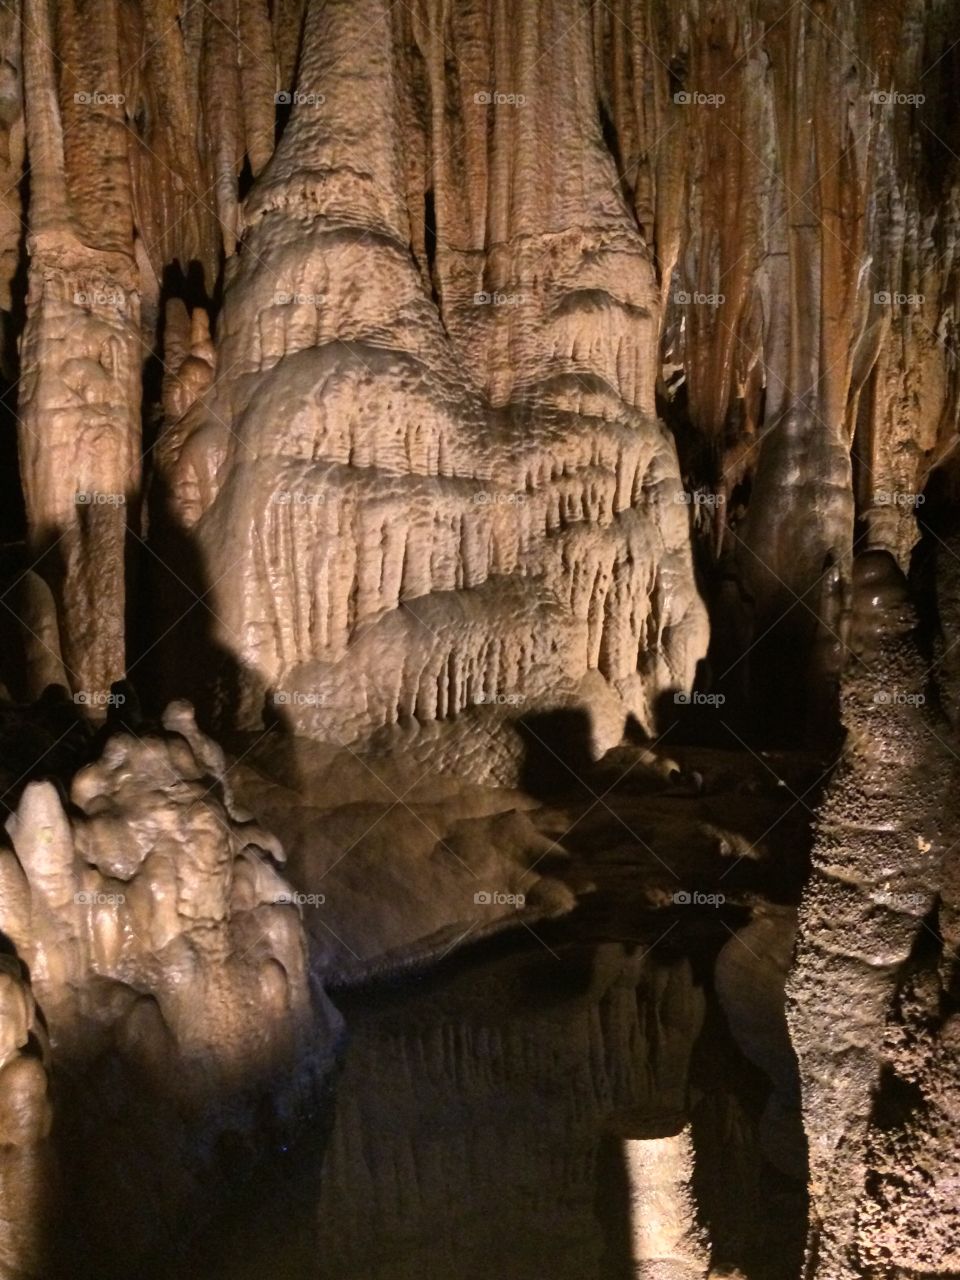 Reflected Upon A Pool. A seasonal pool reflects the image of a stalagmite within the Florida Caverns.